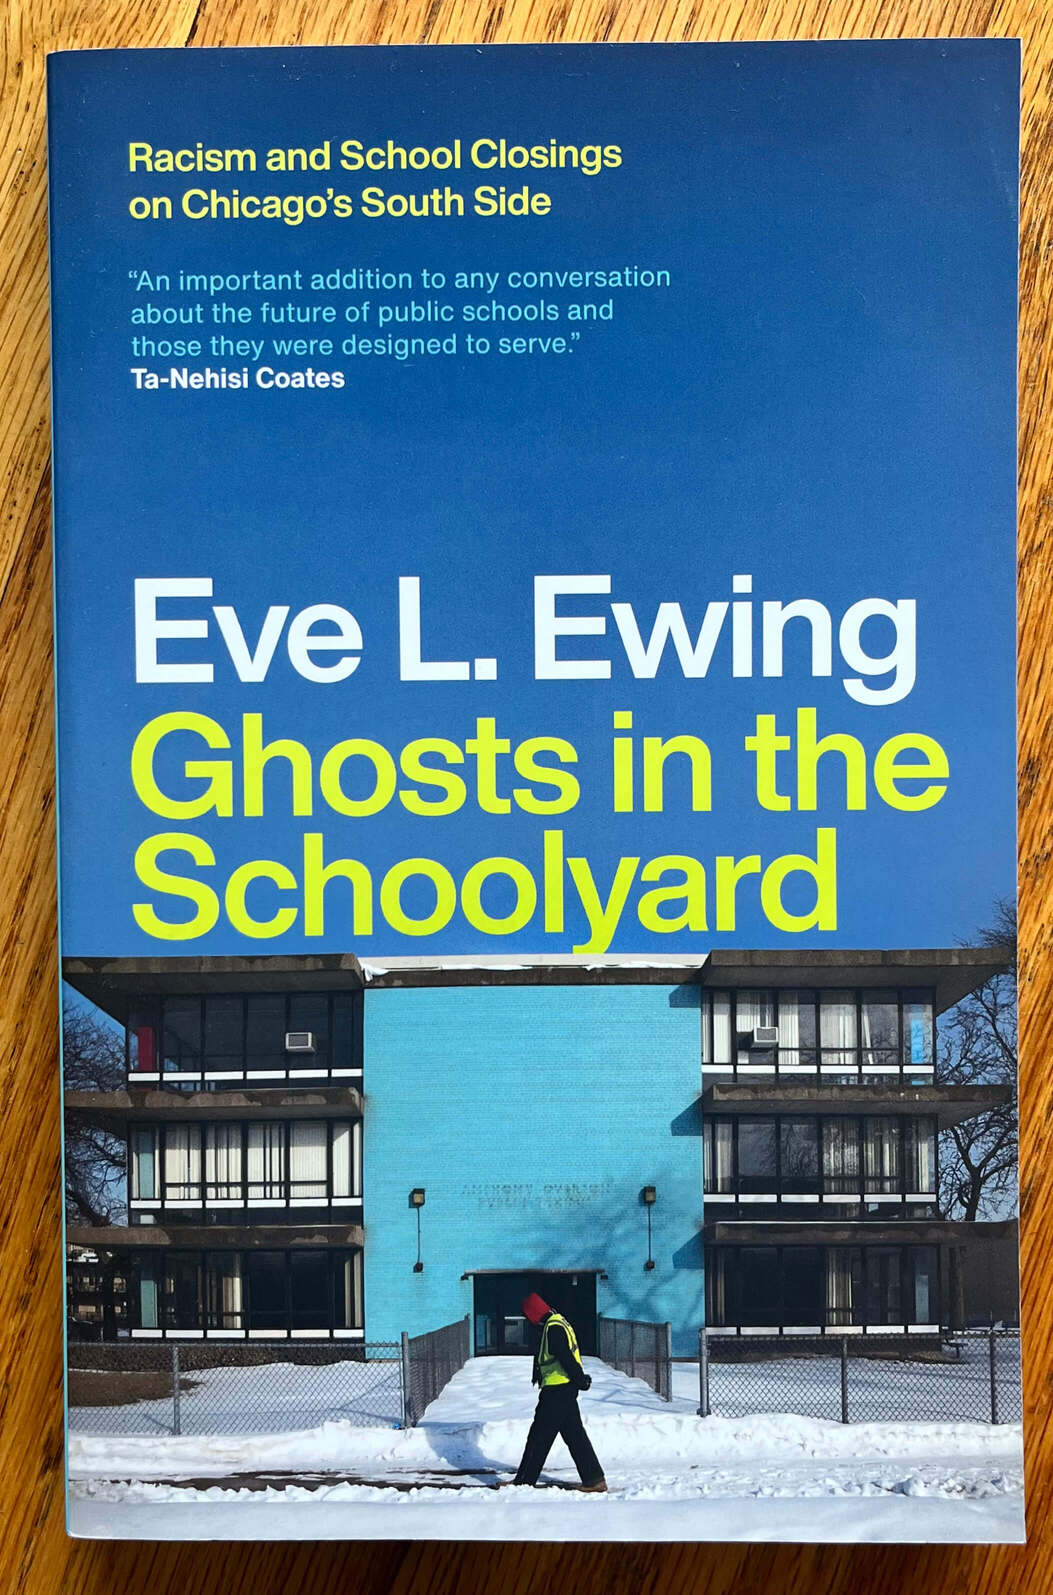 “Ghosts in the Schoolyard: Racism and School Closings on Chicago’s South Side” by Eve L. Ewing. “An important addition to any conversation about the future of public schools and those they were designed to serve.” Ta-Nehisi Coates.